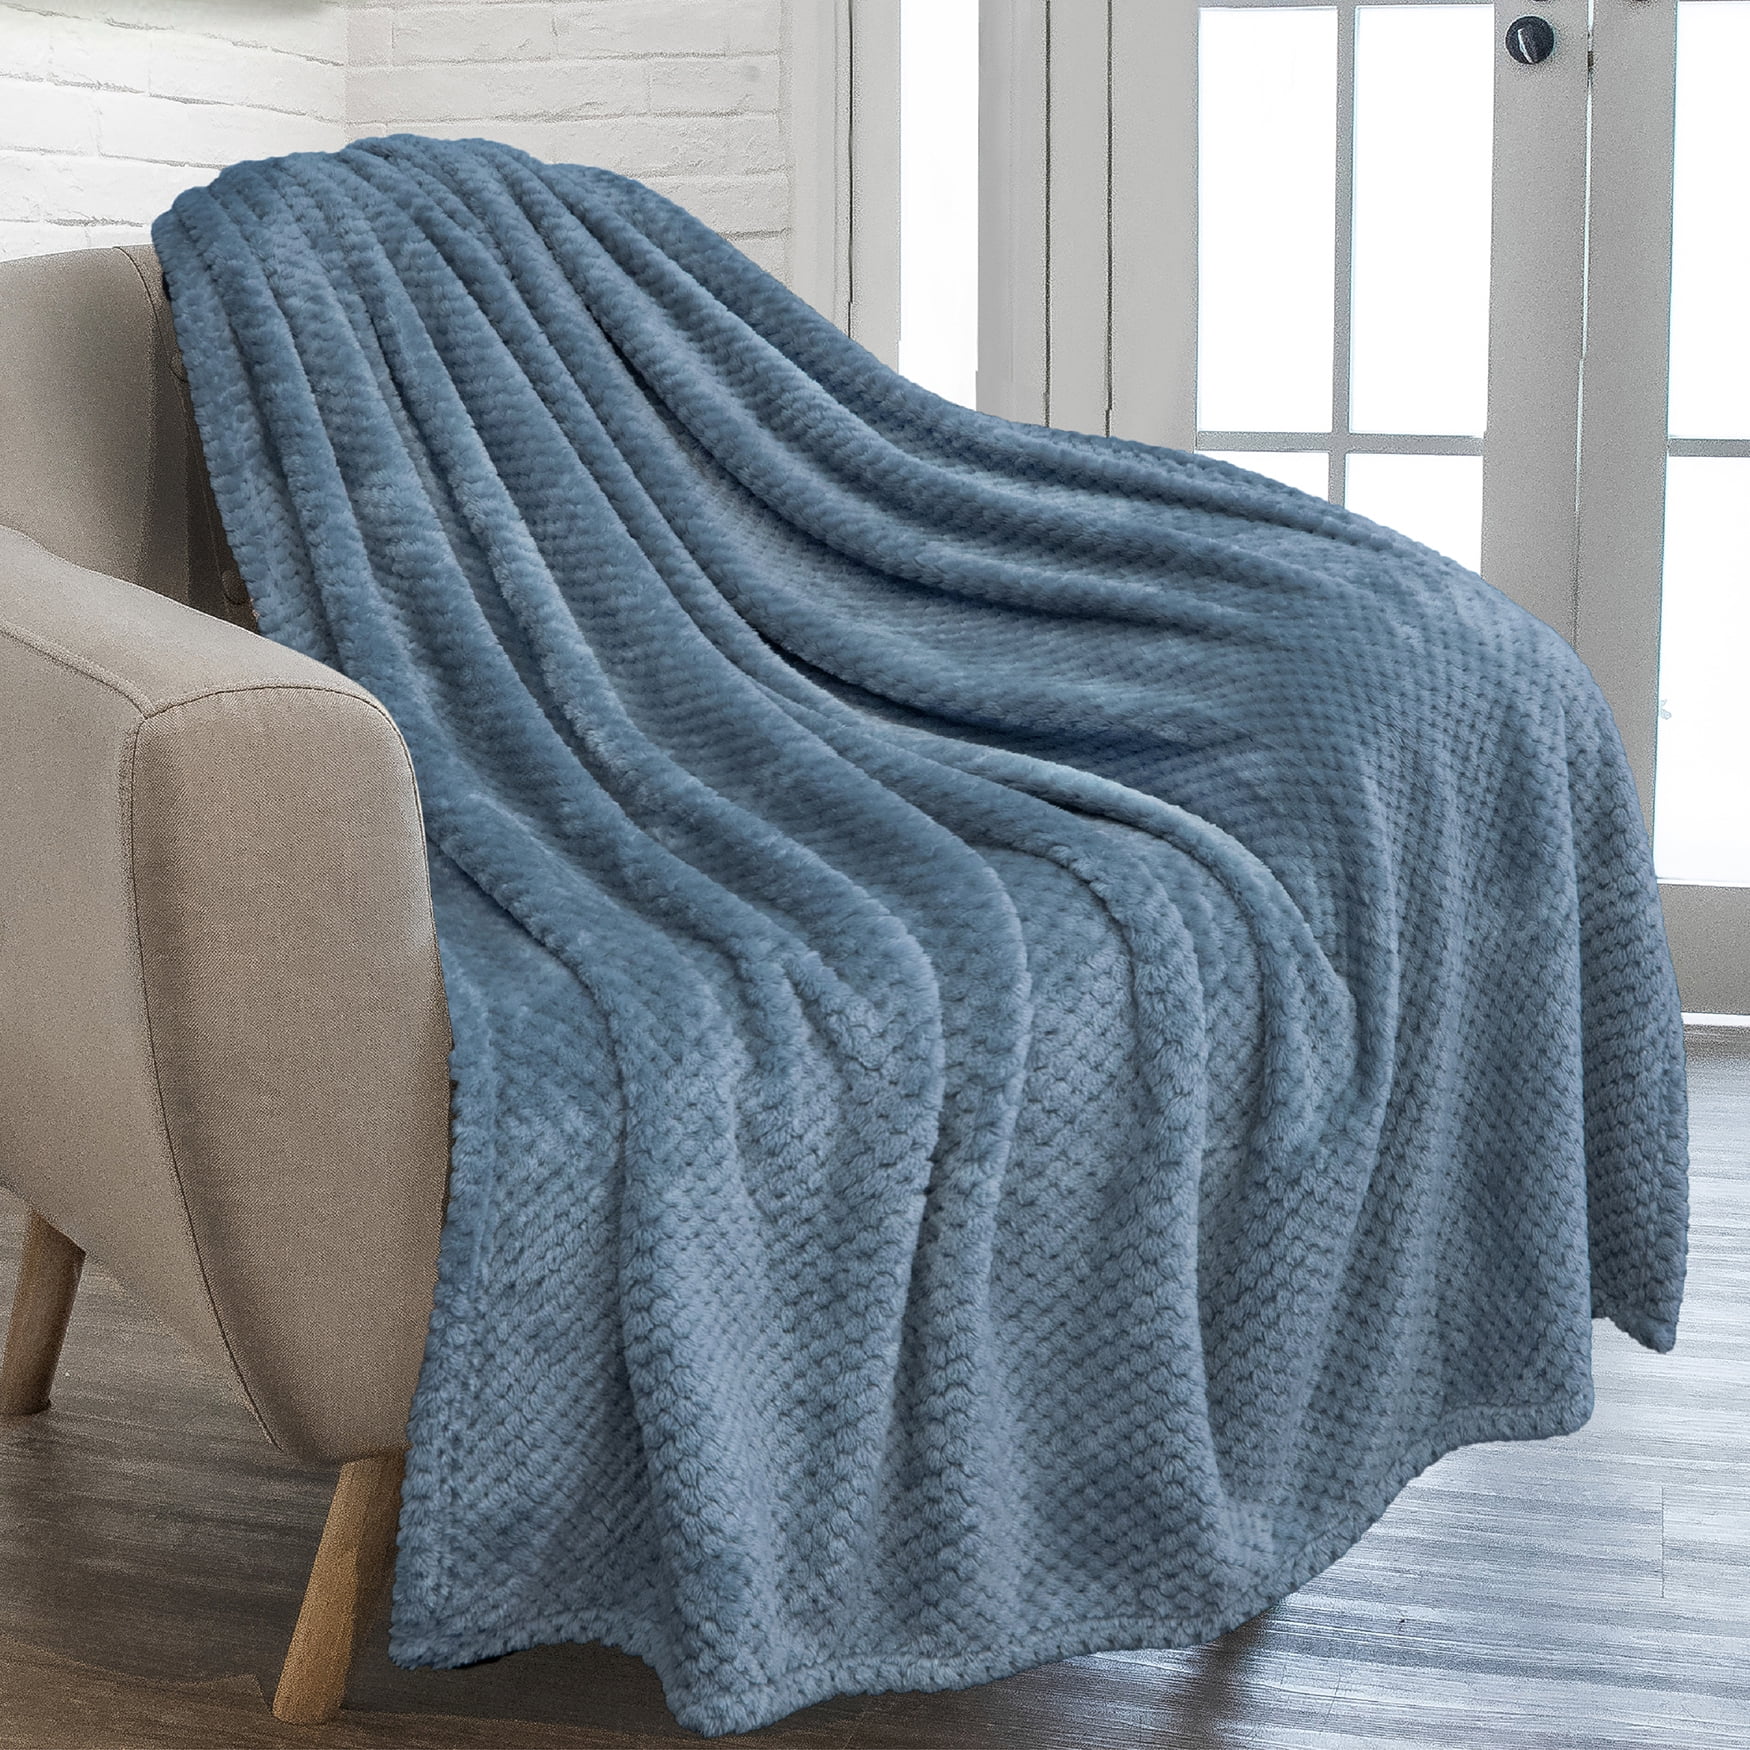 Super Soft Fleece Blanket Double Bed Four Seasons Winter Fluffy Air-Conditioning Blanket Sofa for Adults Blue Snowflakes Throw Blankets 